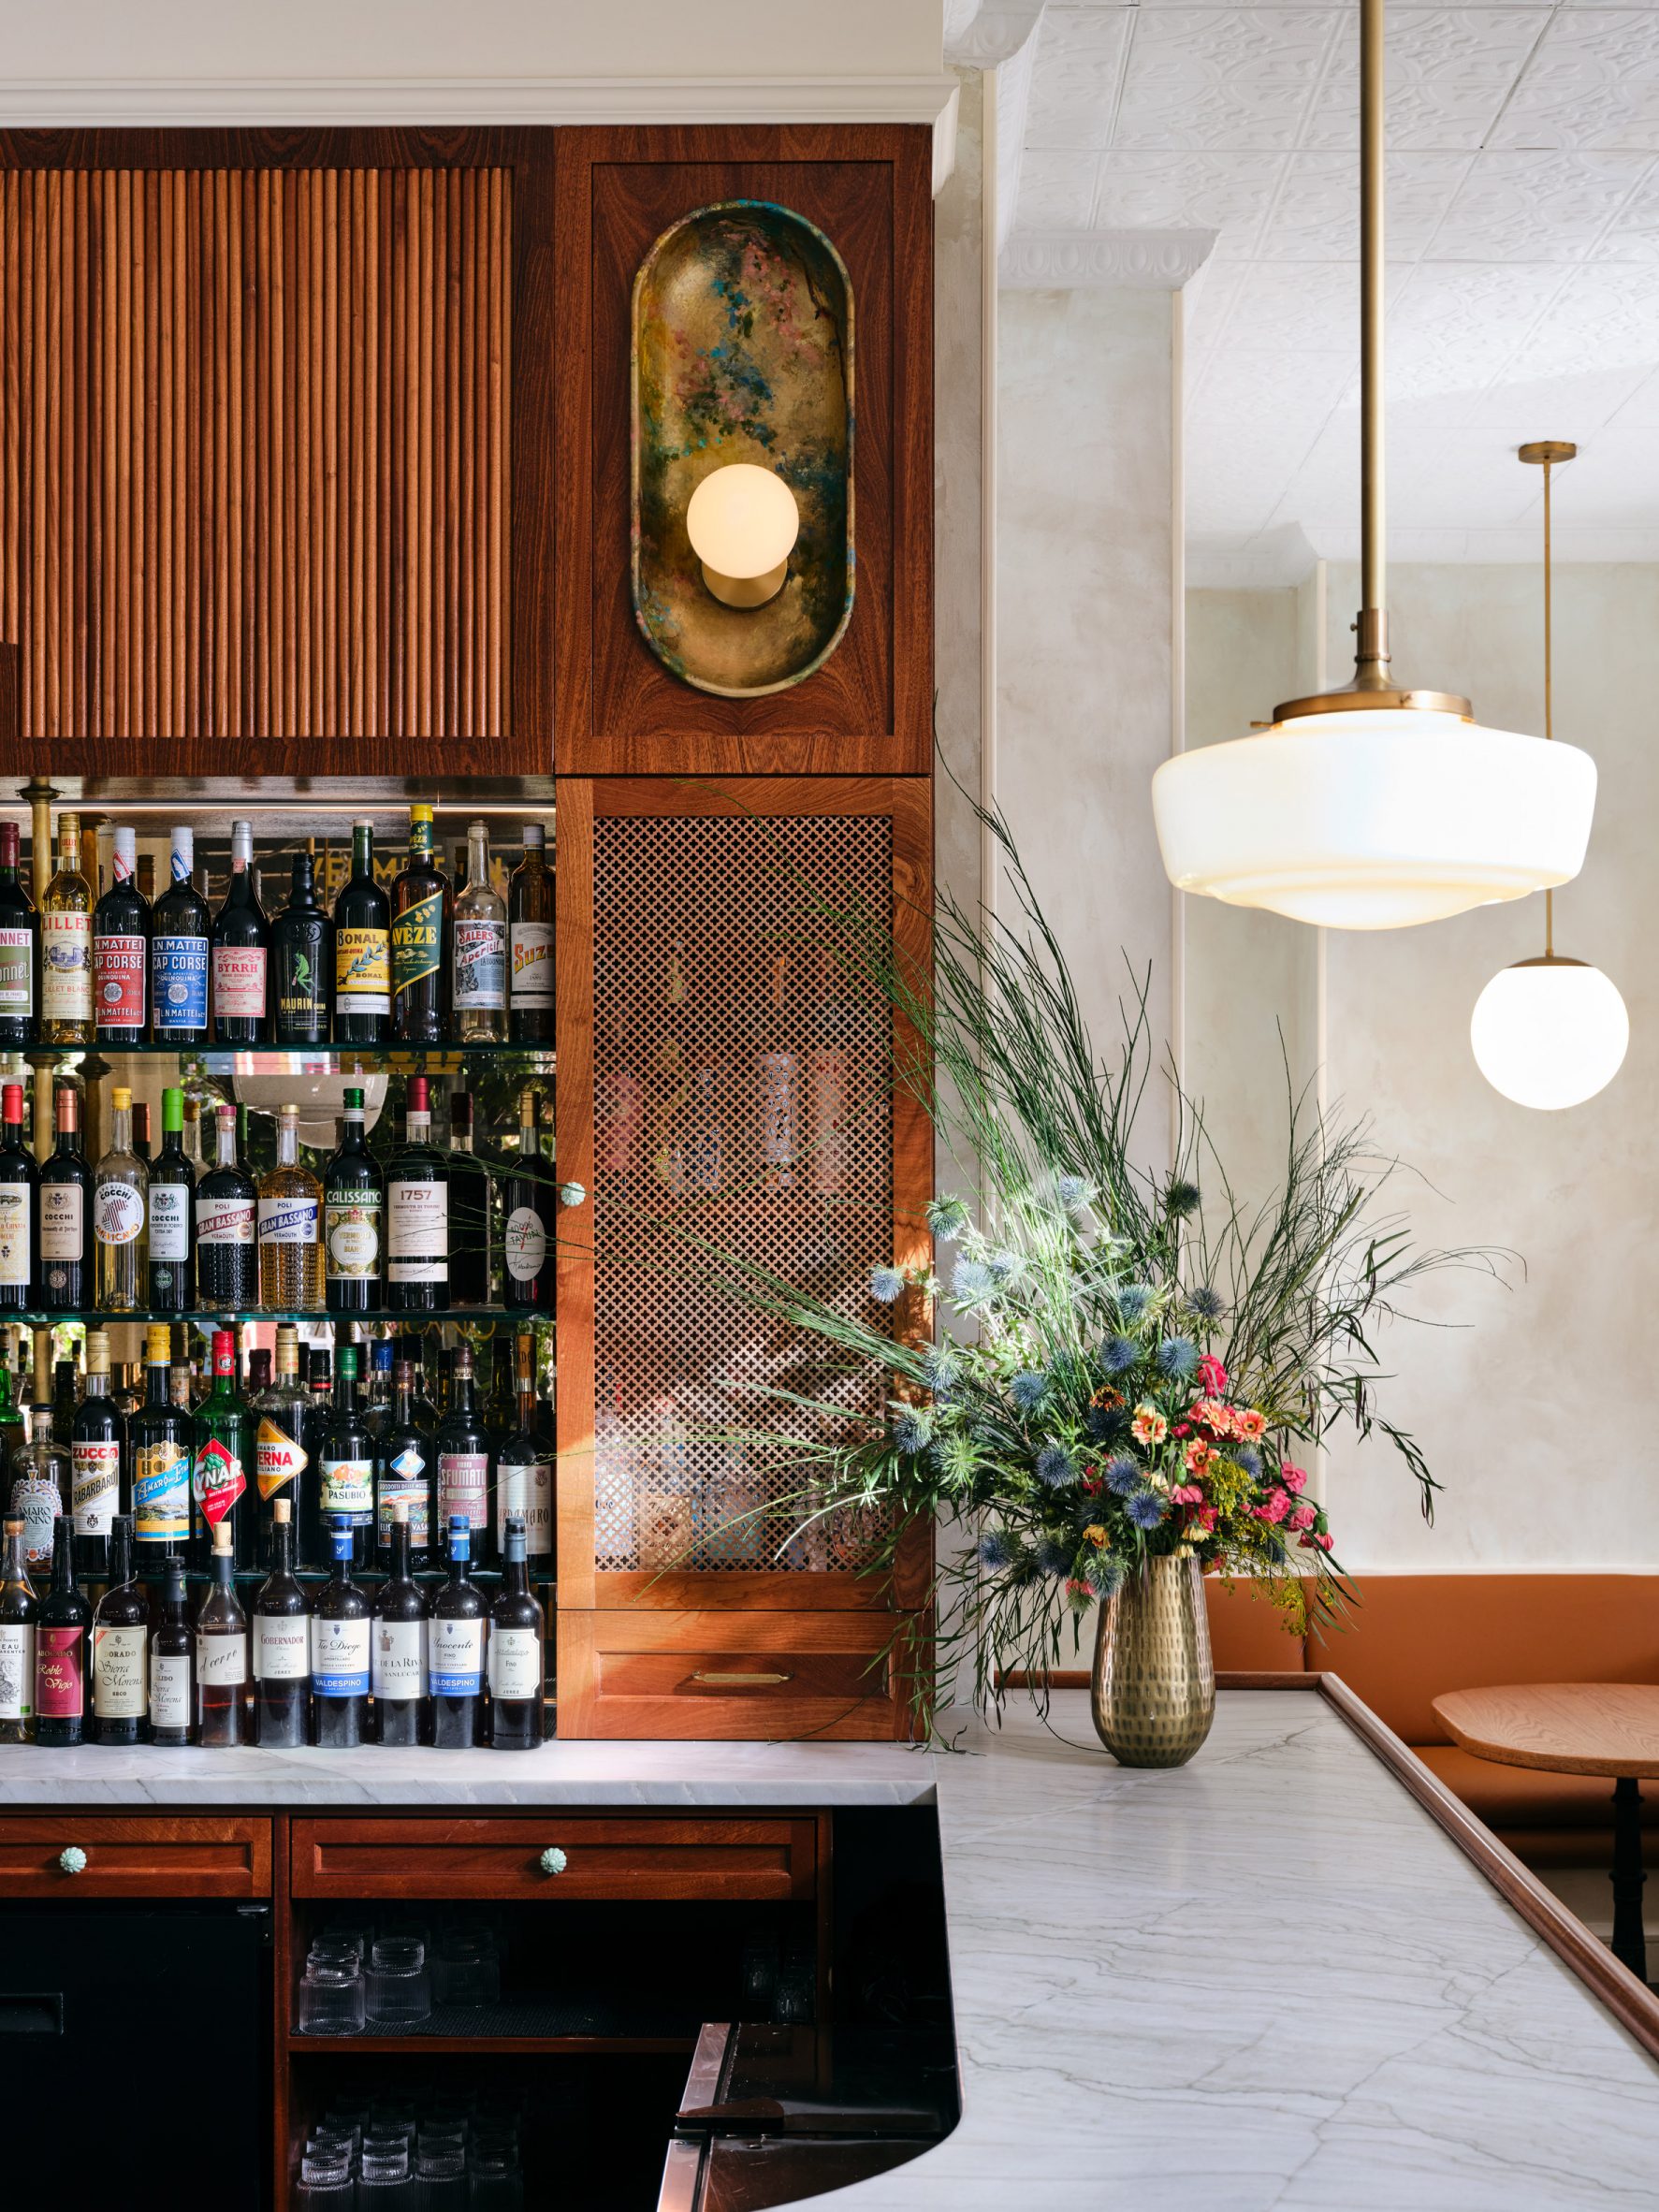 Ménard Dworkind outfits Montreal restaurant with custom wine storage